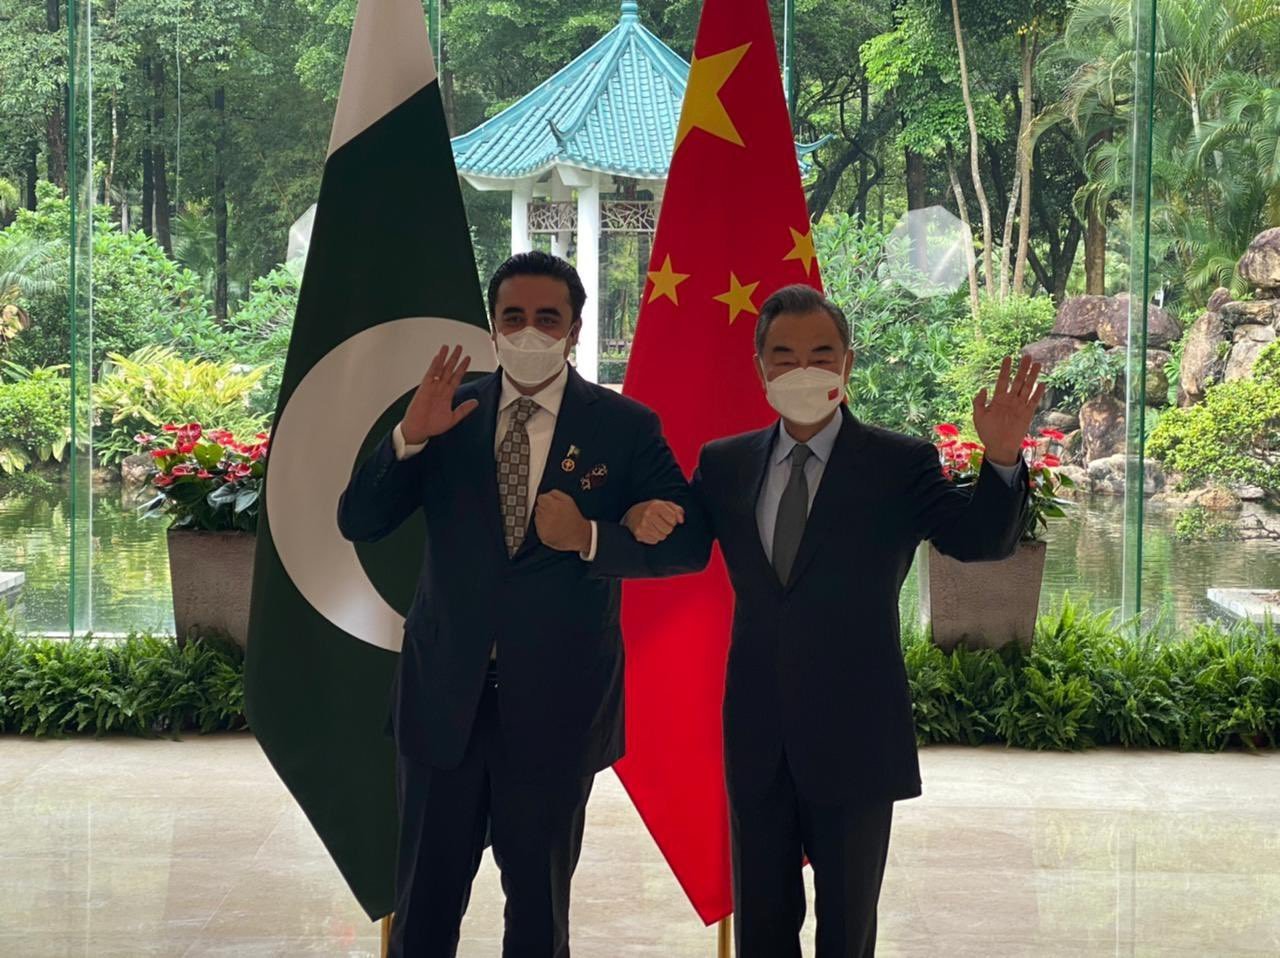 Sino-Pak friendship 'based on mutual support' says Bilawal on first bilateral visit